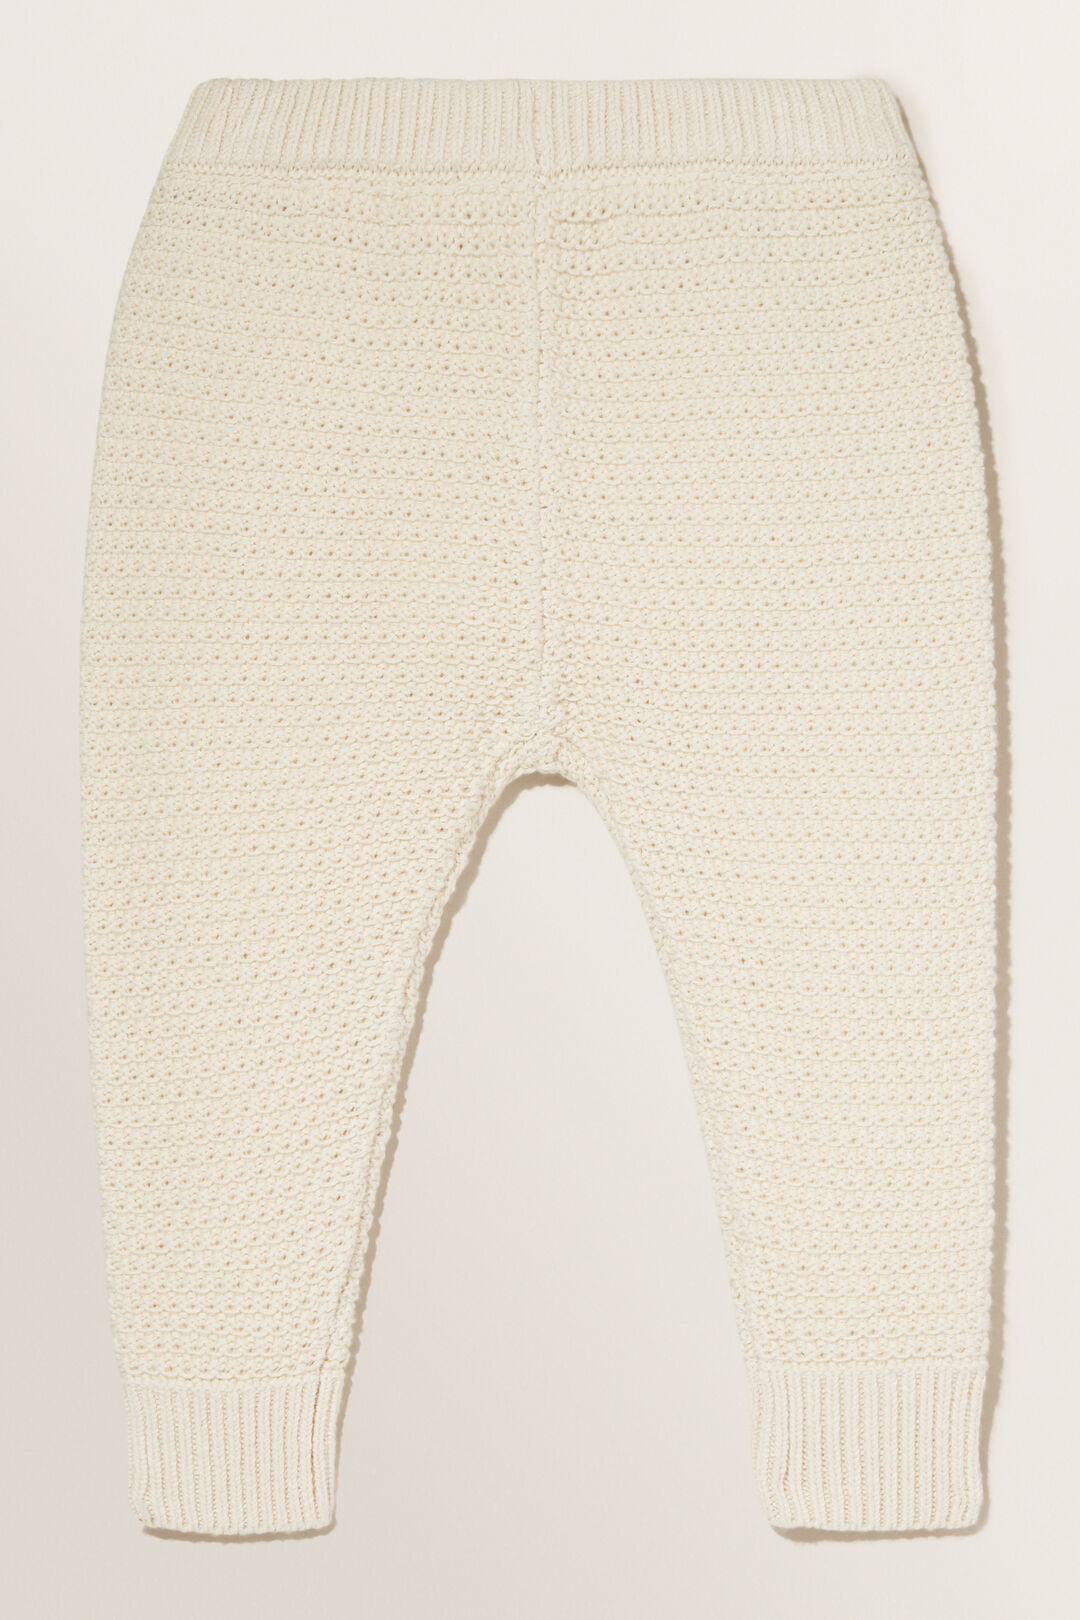 Knitted Stitch Pant  Rich Cream  hi-res